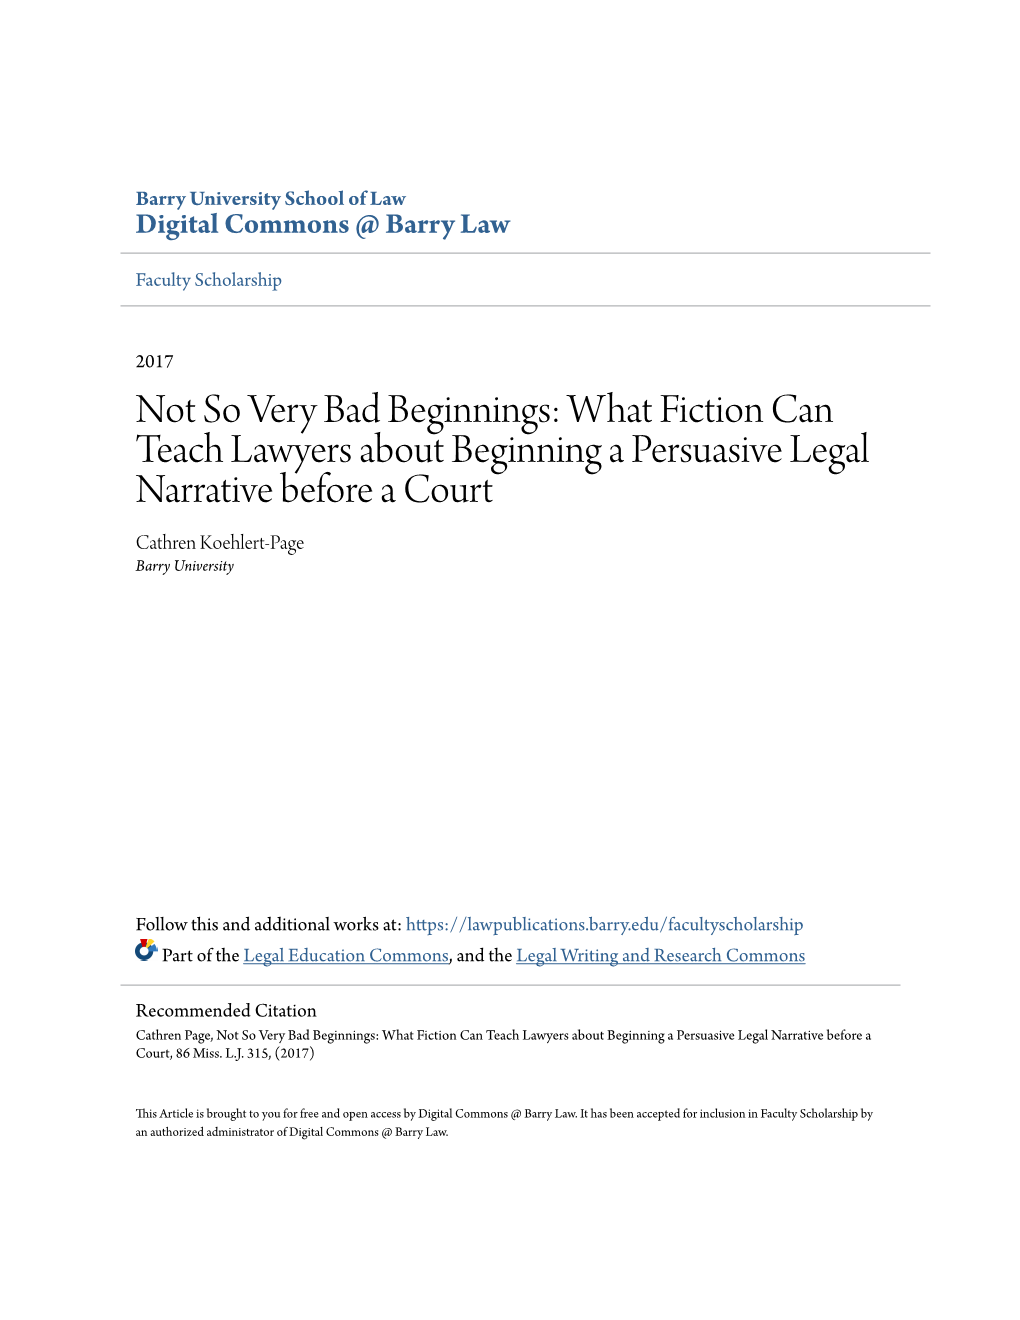 Not So Very Bad Beginnings: What Fiction Can Teach Lawyers About Beginning a Persuasive Legal Narrative Before a Court Cathren Koehlert-Page Barry University